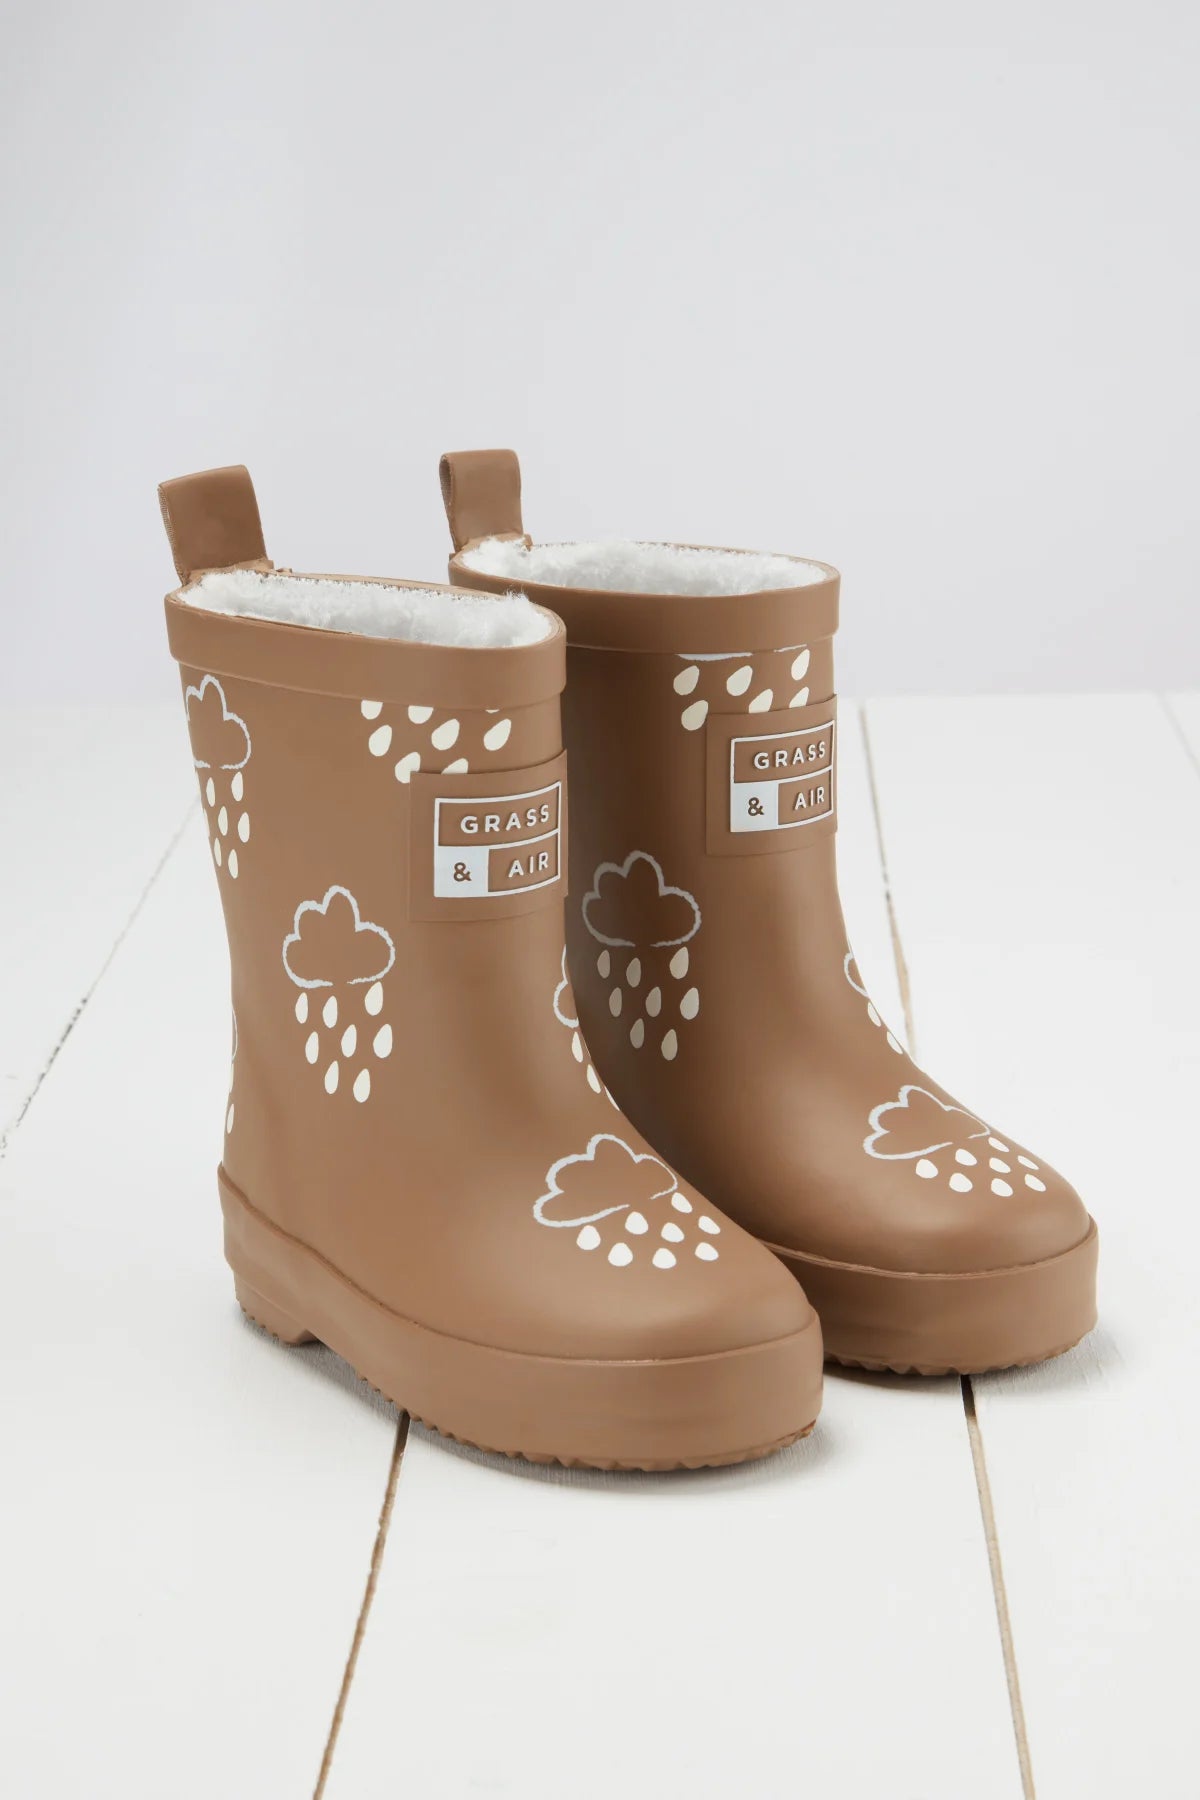 Colour Changing Kids Wellies - Fudge